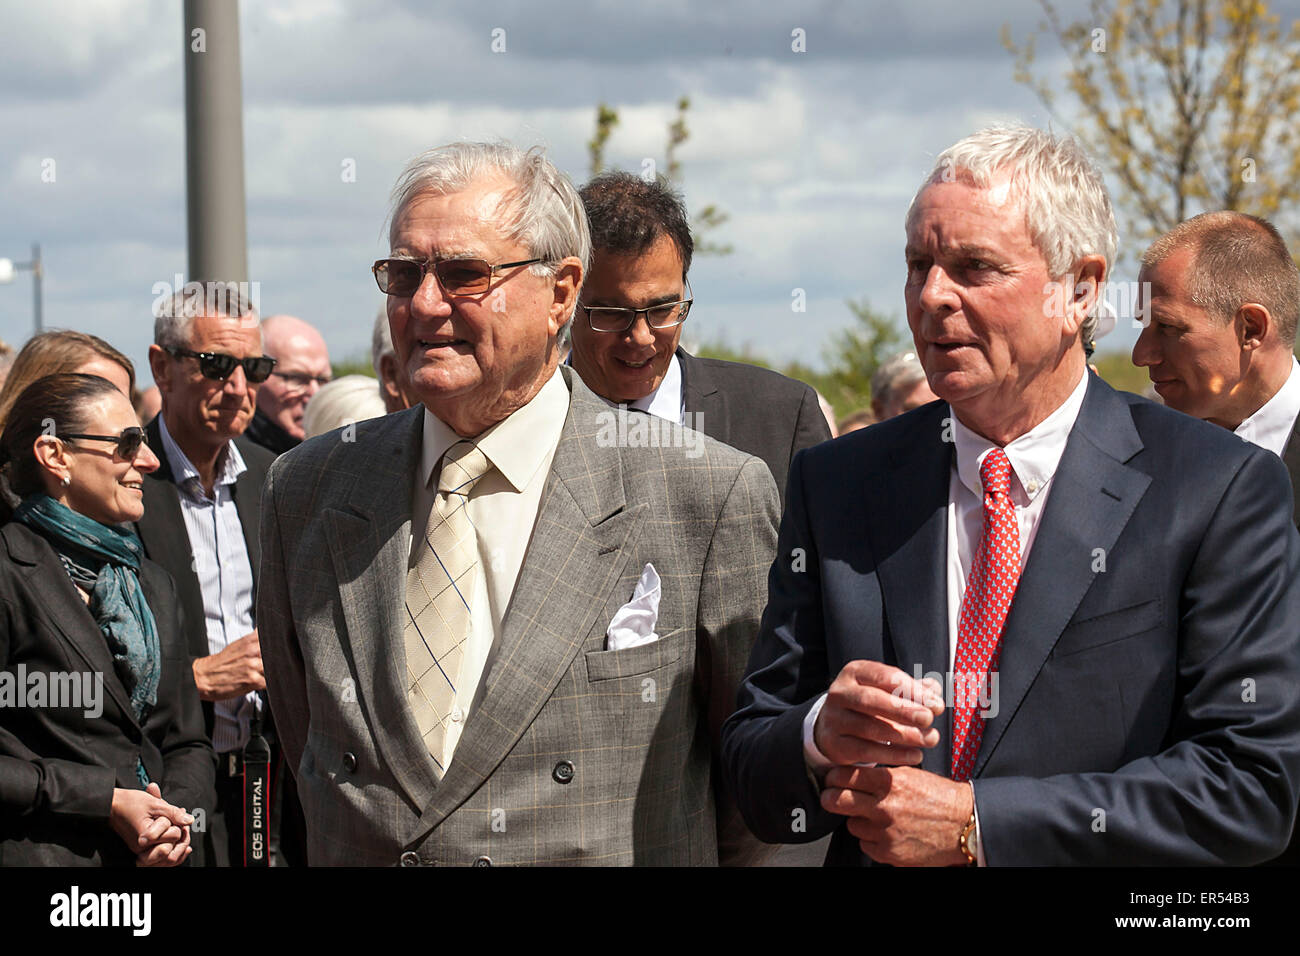 Hedehusene, Denmark, May 27th, 2015: Prince Concort Henrik (2nd, R) arrives to DSV’s new head quarter in Hedehuene near Copenhagen. The Prince Concort reveiled his new sculpture, “The Creative Hand”, which stands near the entrence to DSV. At the photo he is followed by DSV chairman, Kurt Larsen (1st, R) Credit:  OJPHOTOS/Alamy Live News Stock Photo